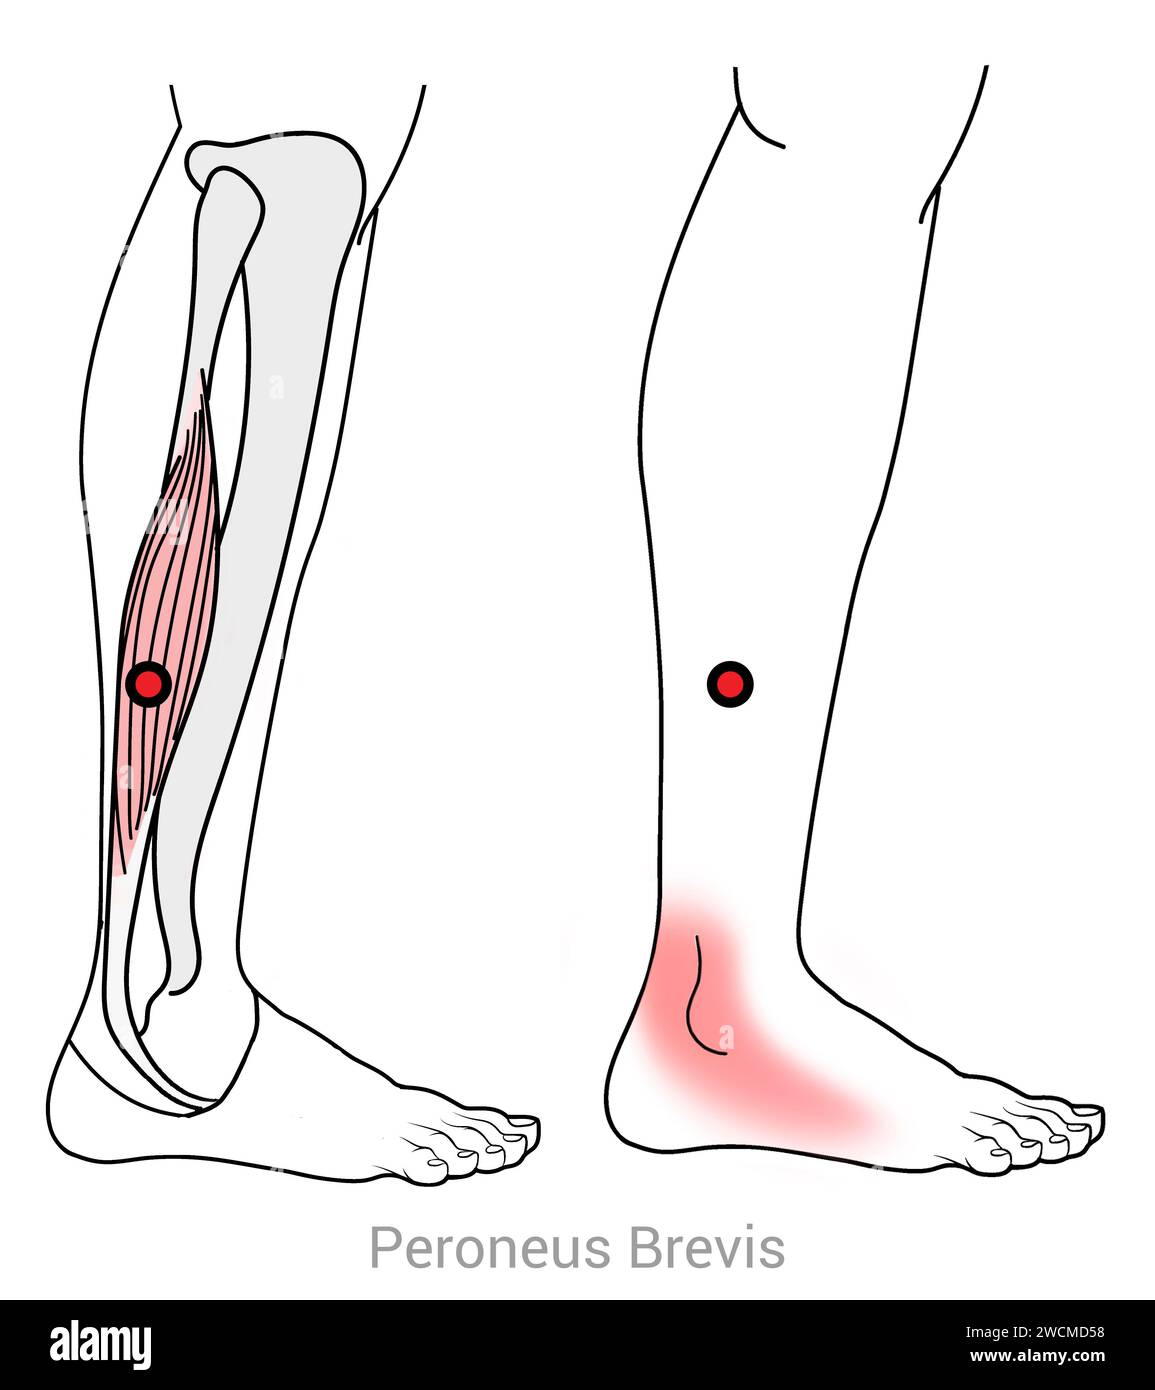 Peroneus Brevis: Myofascial trigger points and associated pain locations Stock Photo